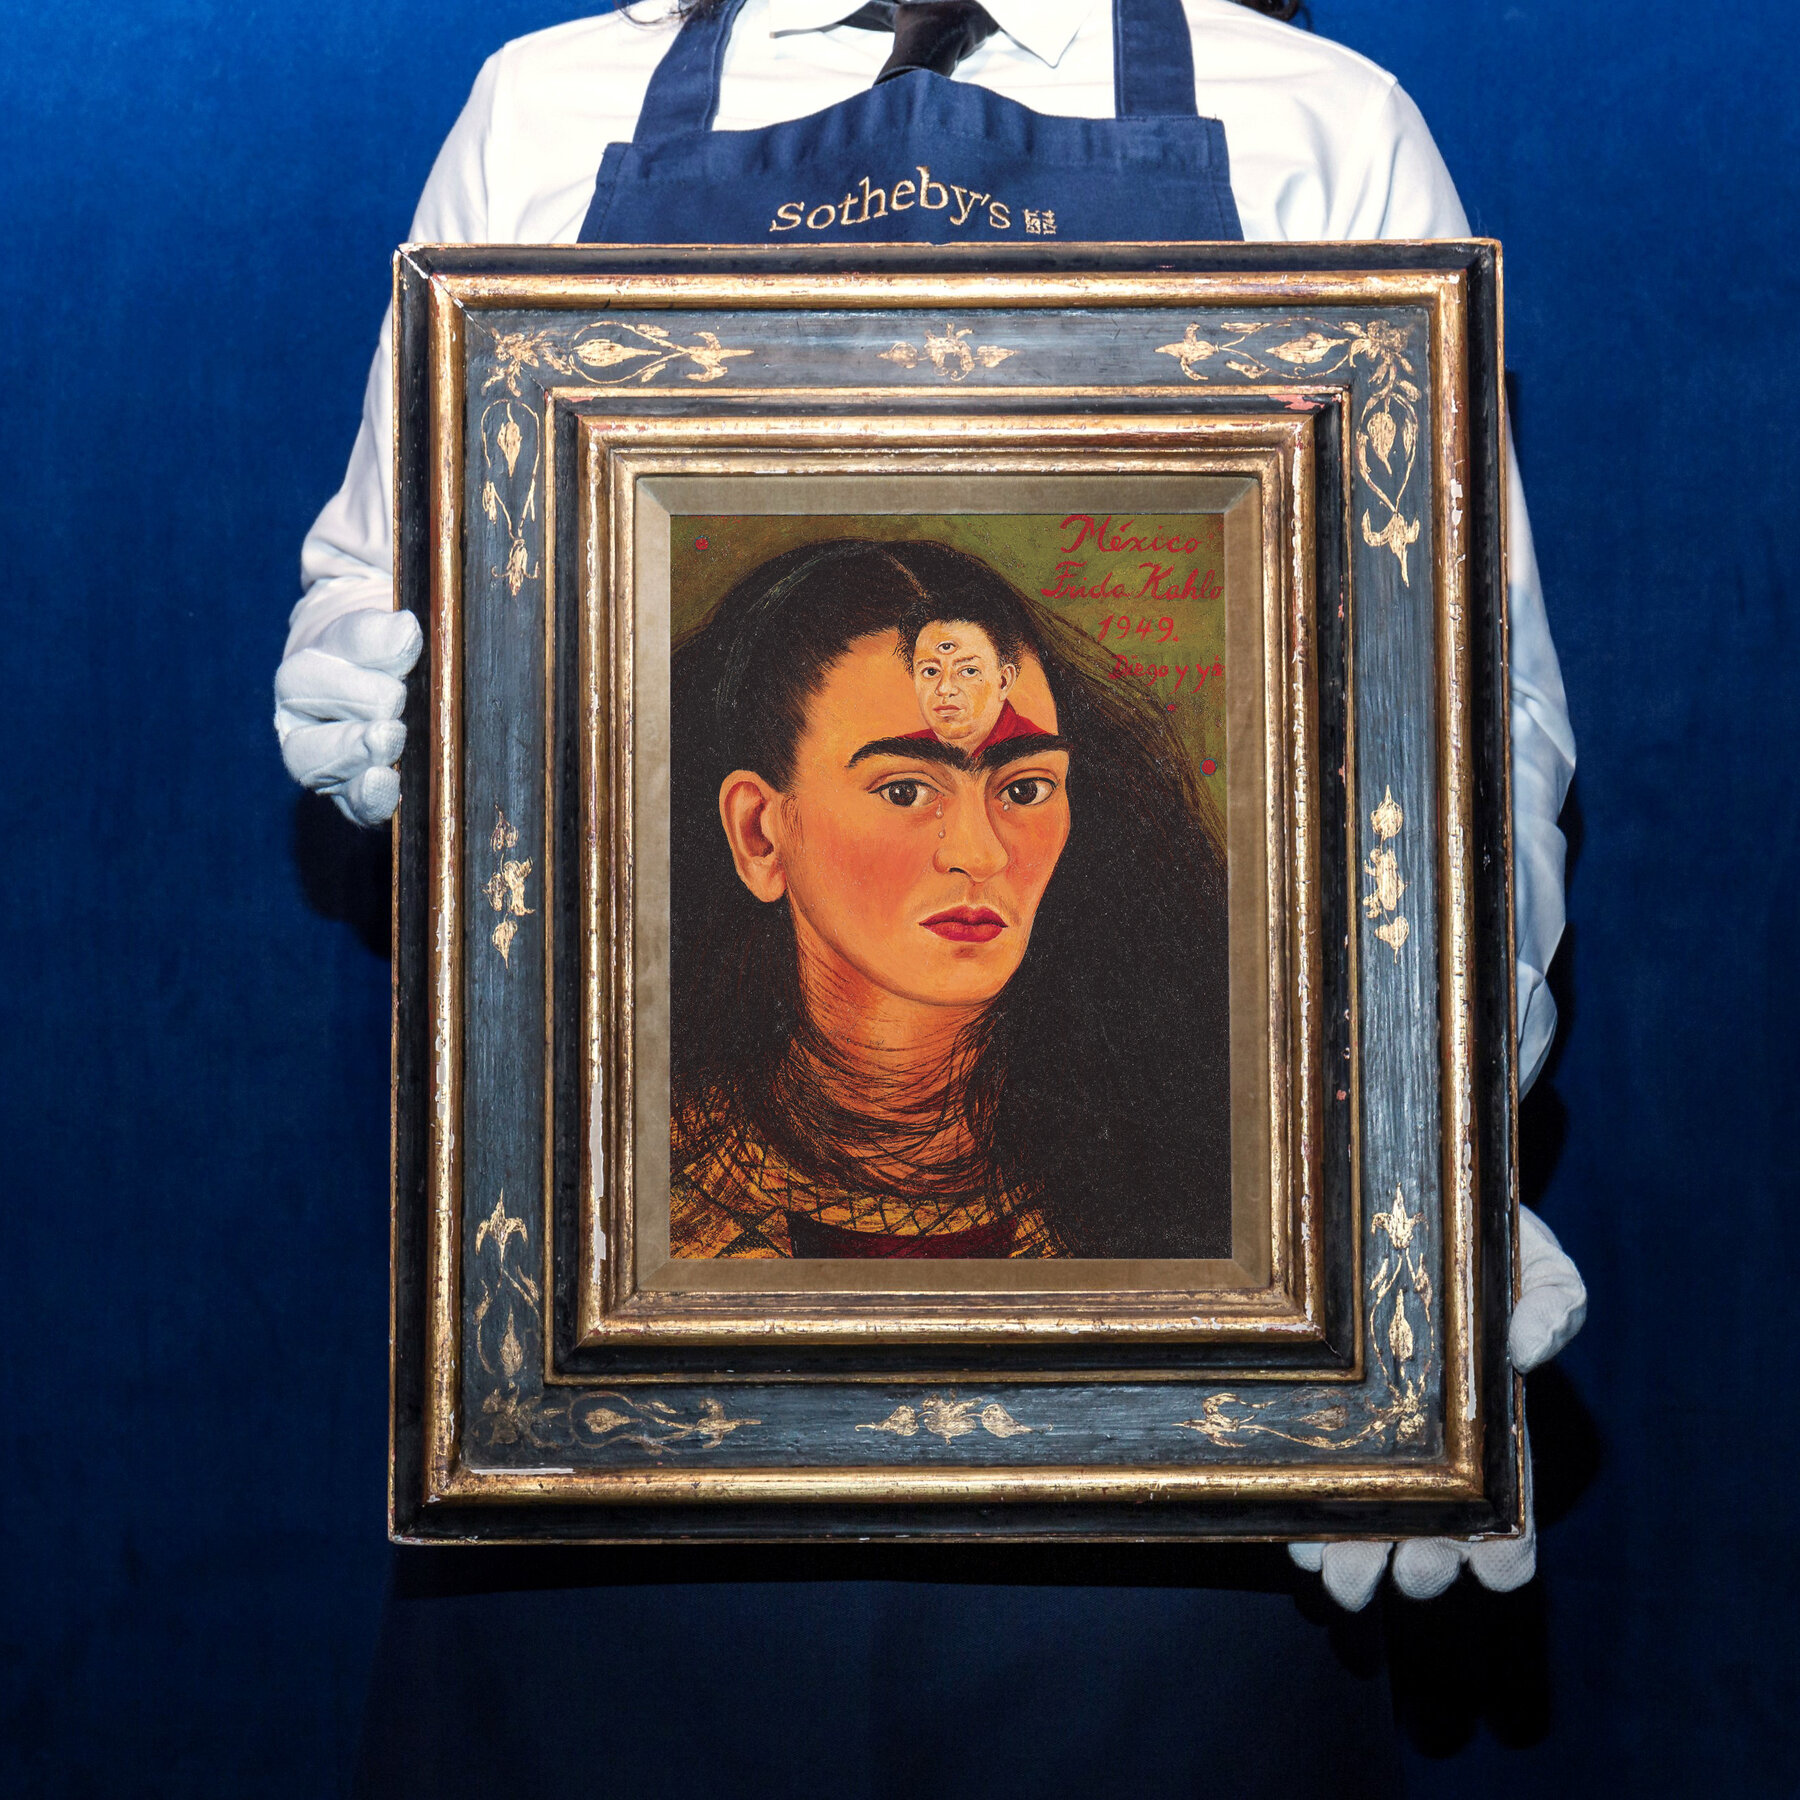 Frida Kahlo portrait sells for a record $34.9 million in New York auction